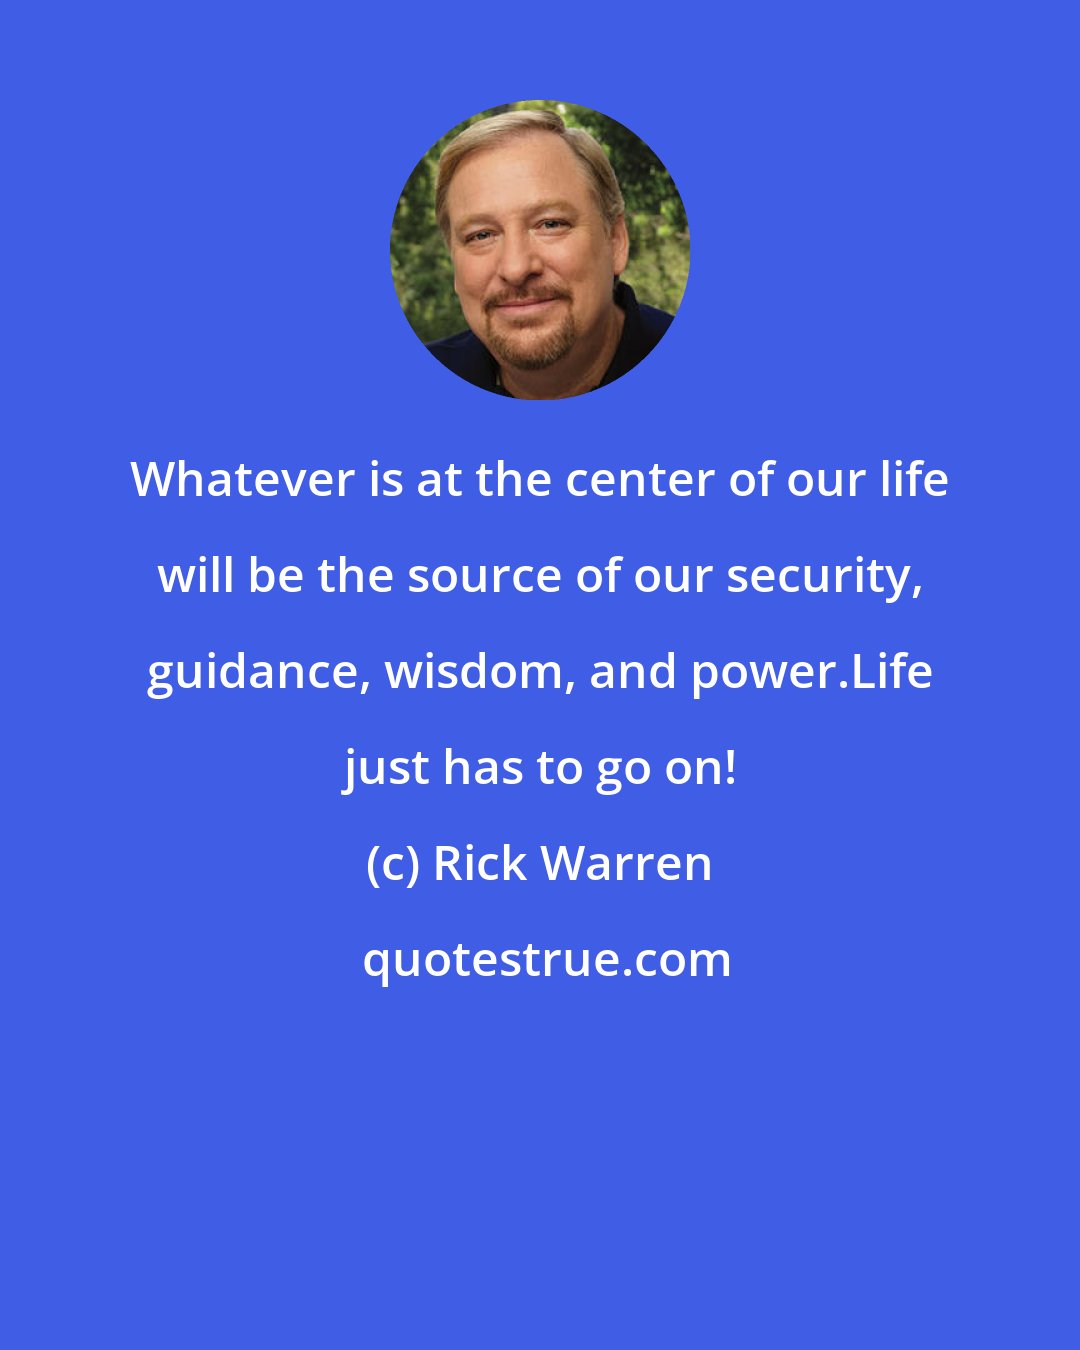 Rick Warren: Whatever is at the center of our life will be the source of our security, guidance, wisdom, and power.Life just has to go on!